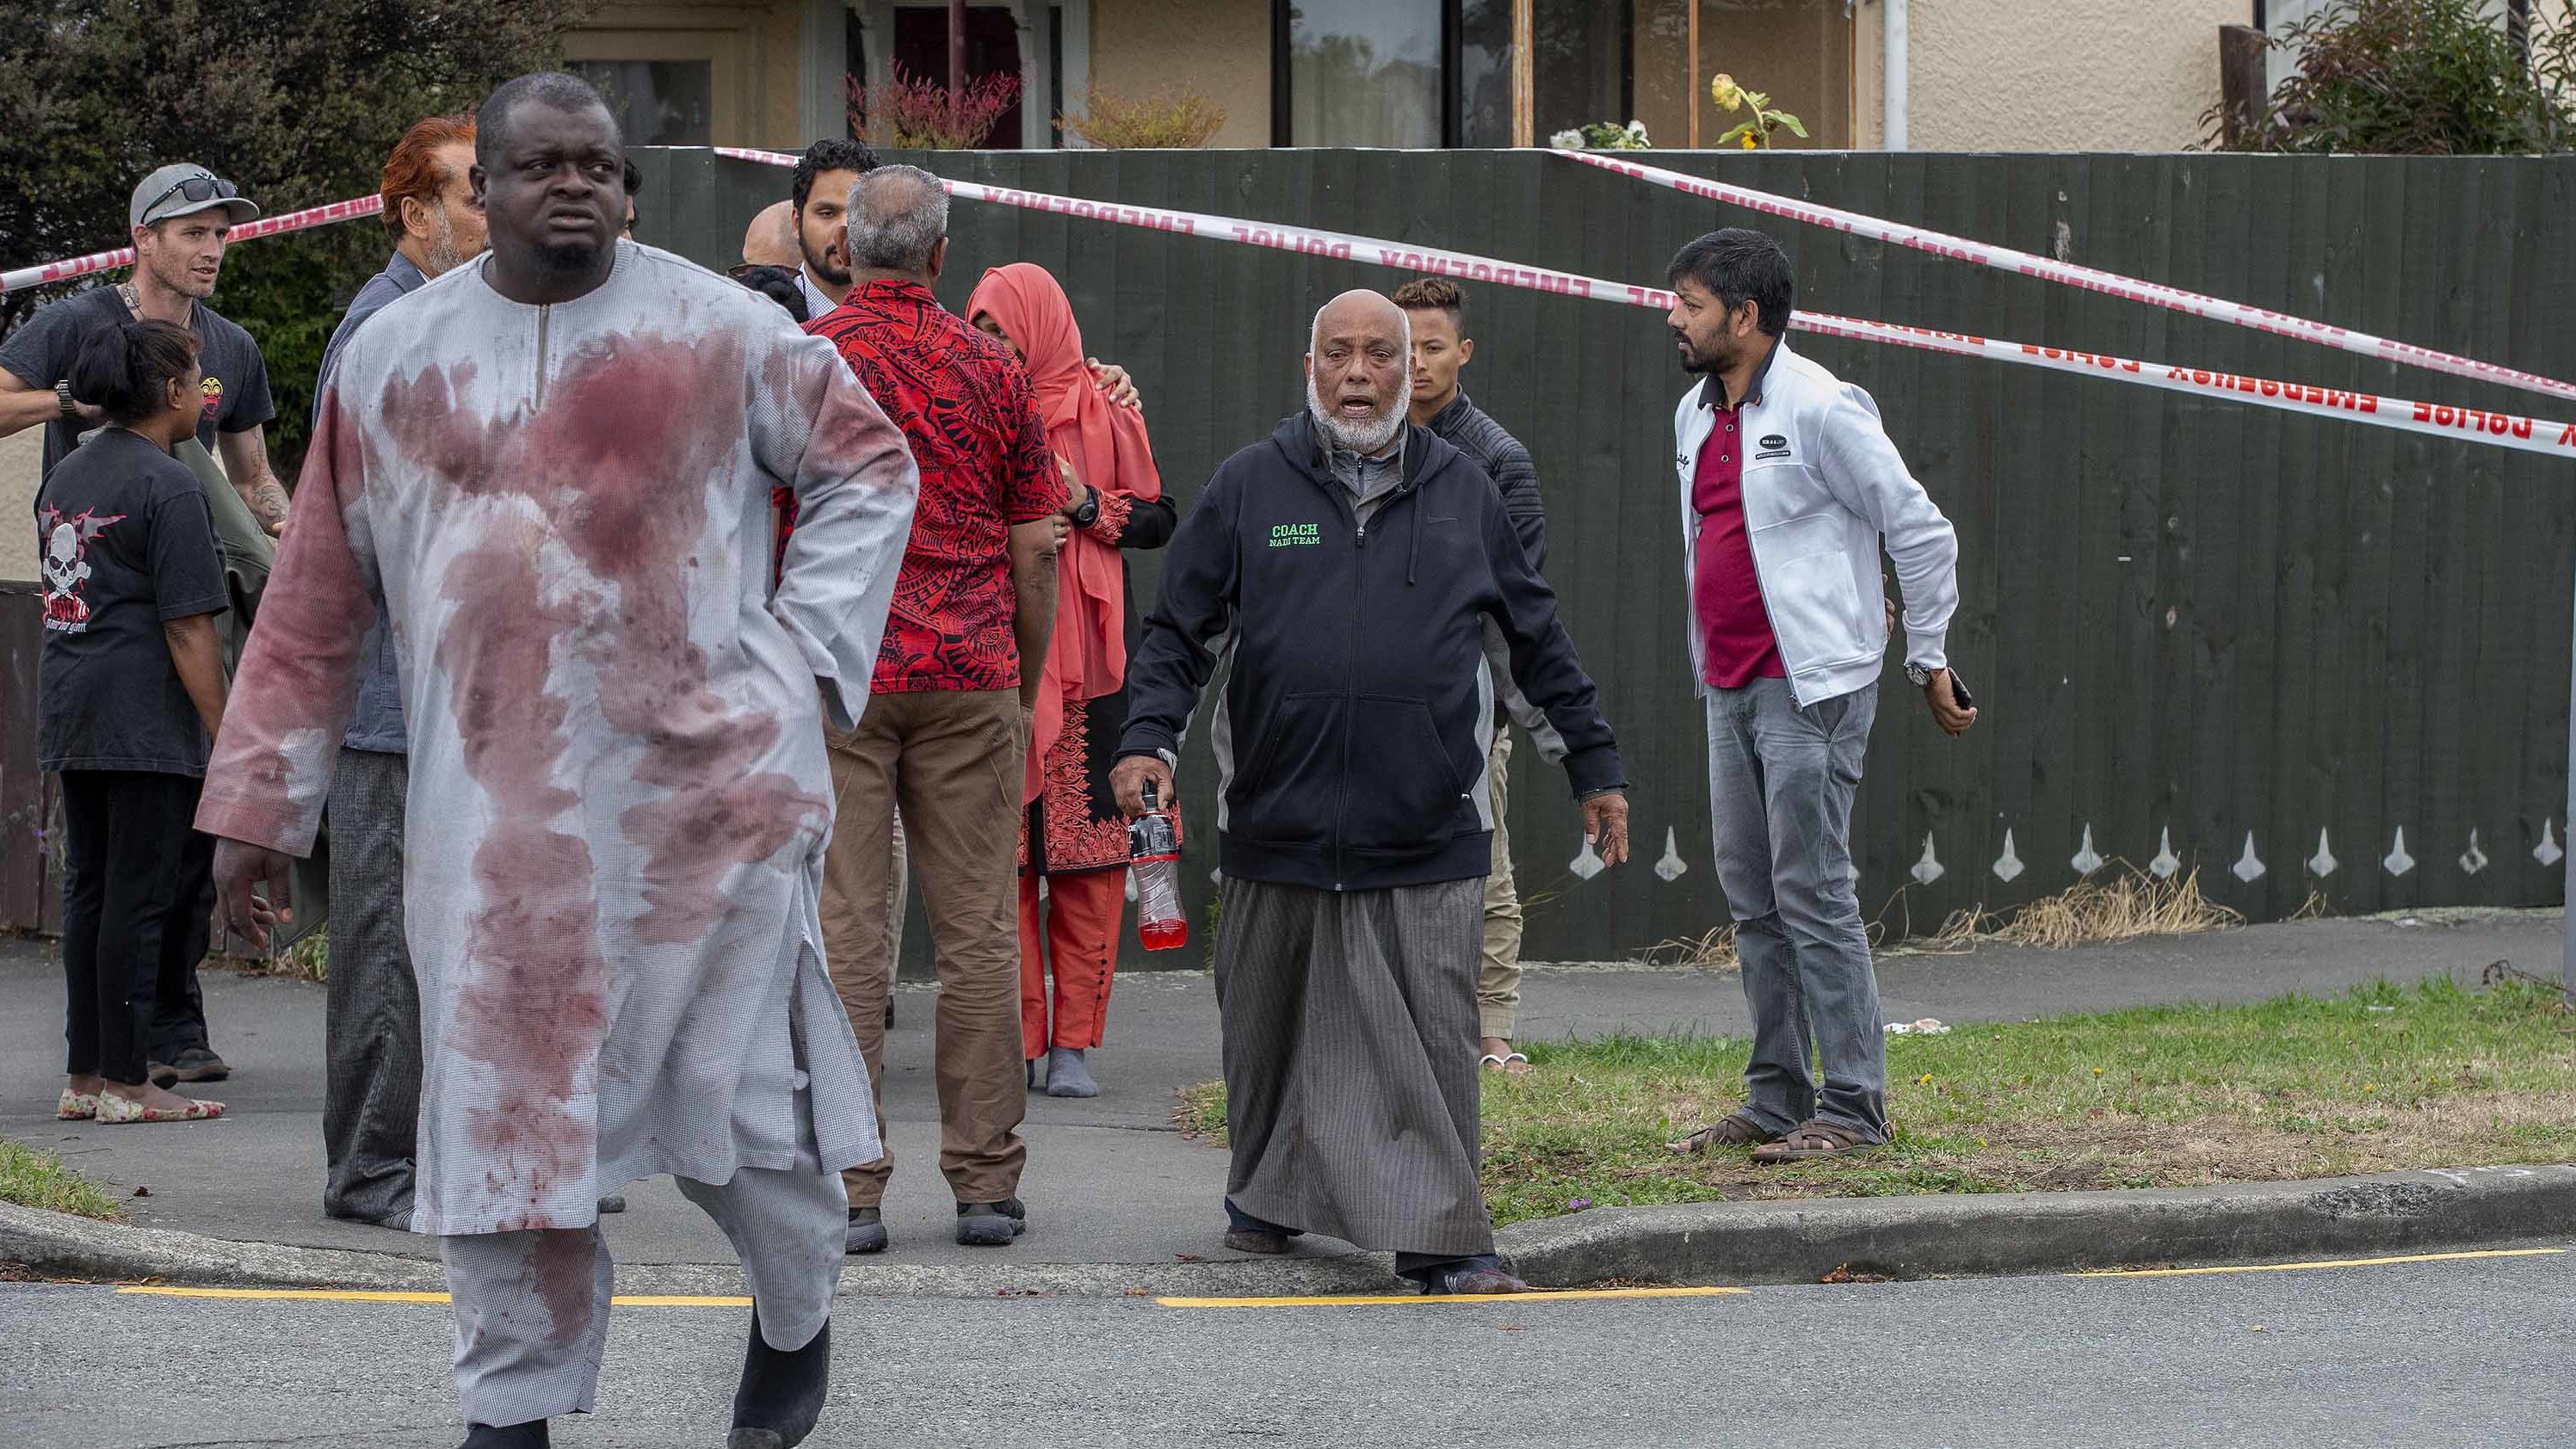 A man with blood-stained clothing is seen near the Linwood mosque on Friday, March 15.